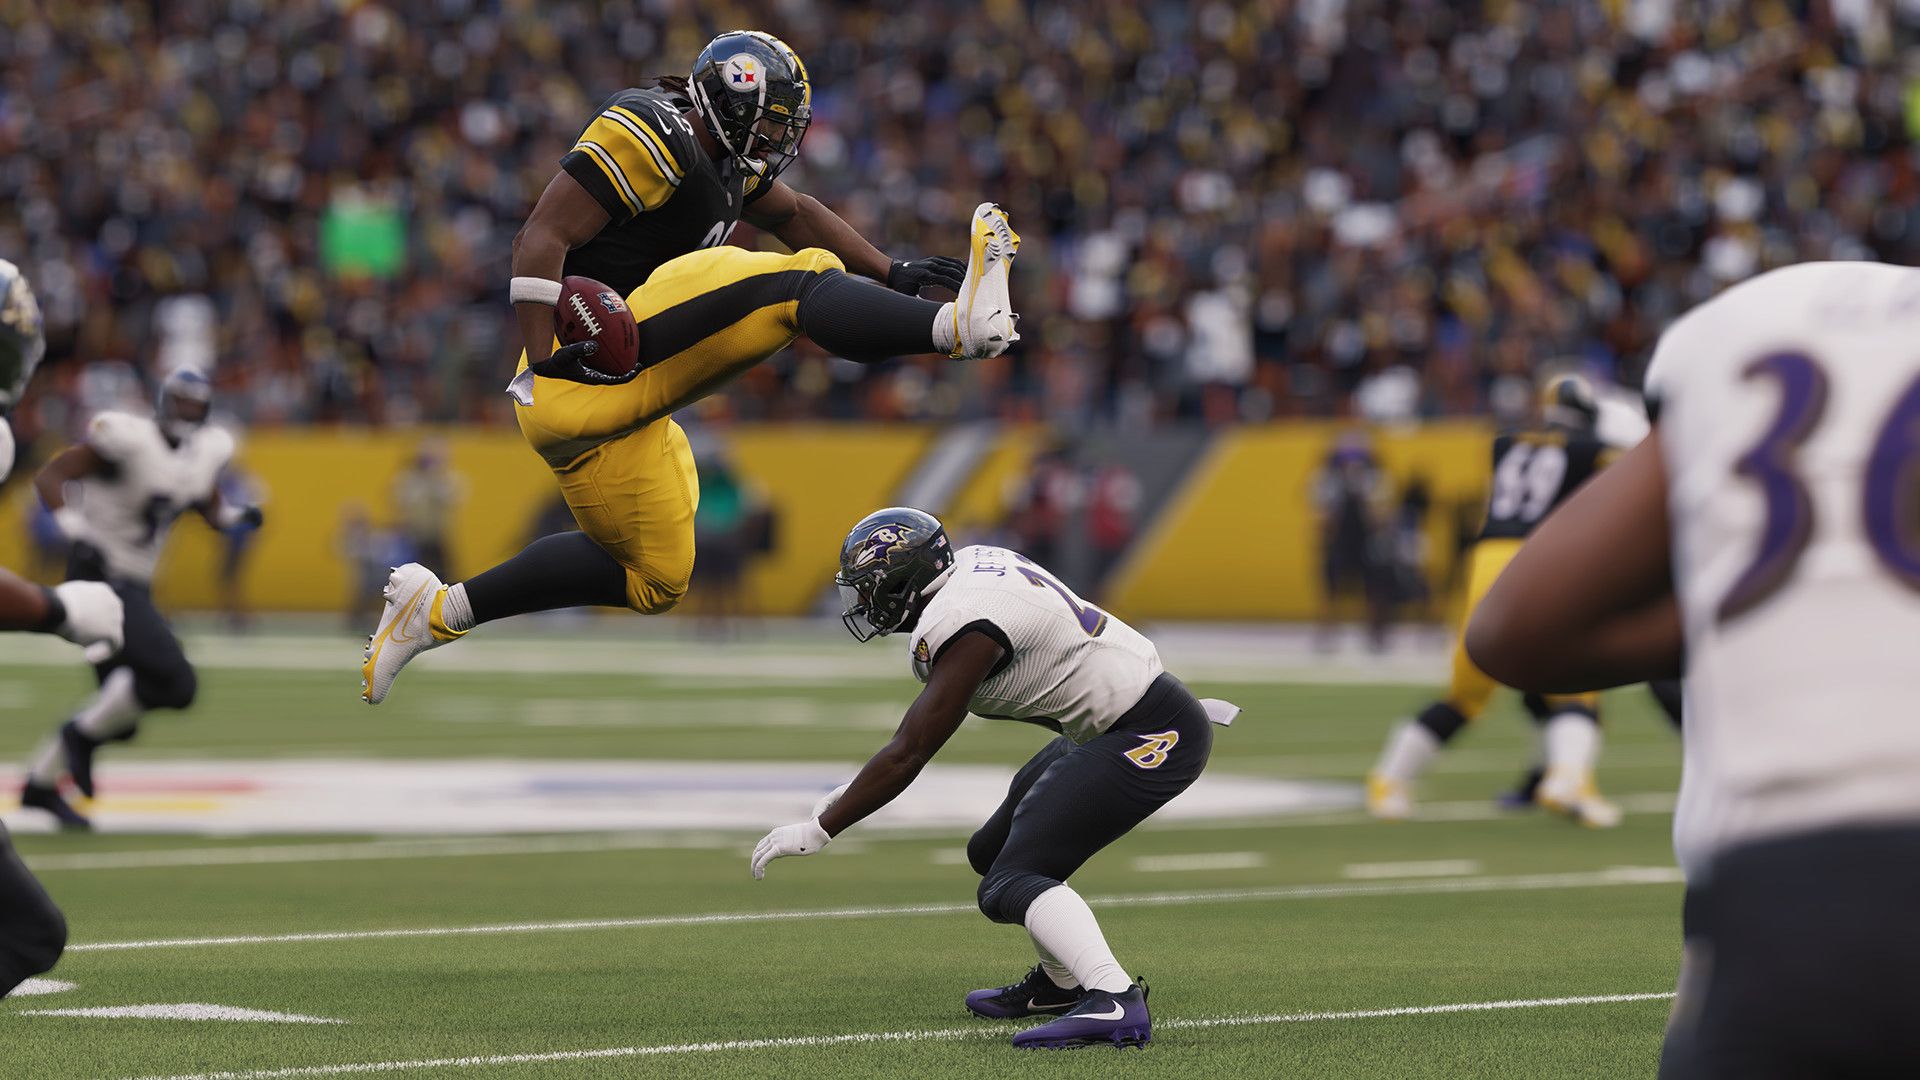 In this article, we are going to be covering Madden 23 ratings of the top 10 players for every position, so you know which are the best in the game.